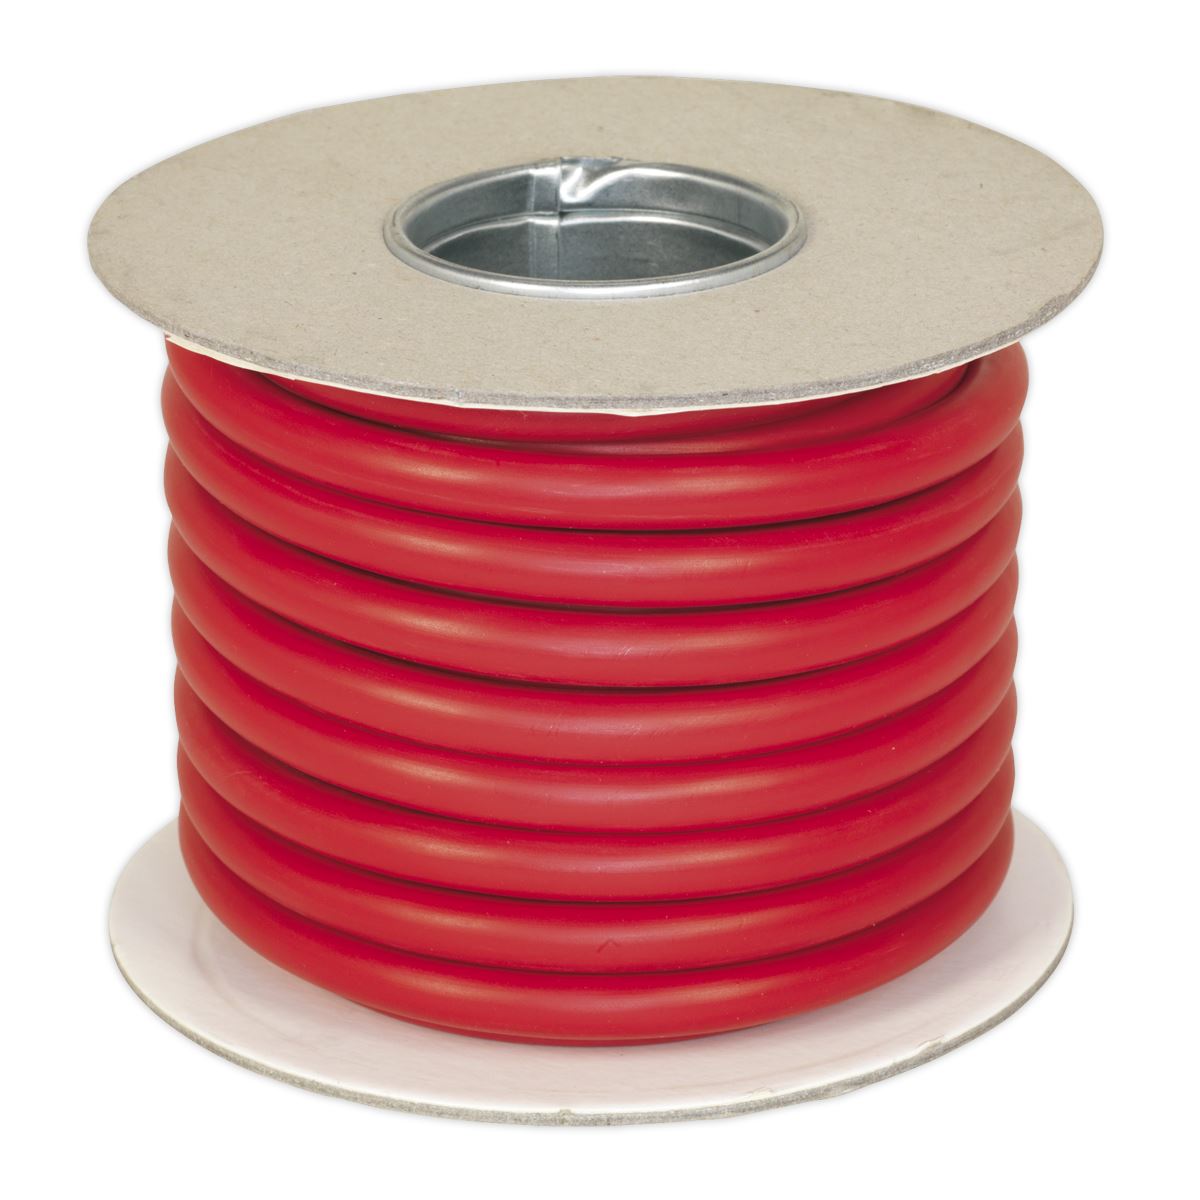 Sealey Automotive Starter Cable 196/0.40mm 25mm² 170A 10m Red